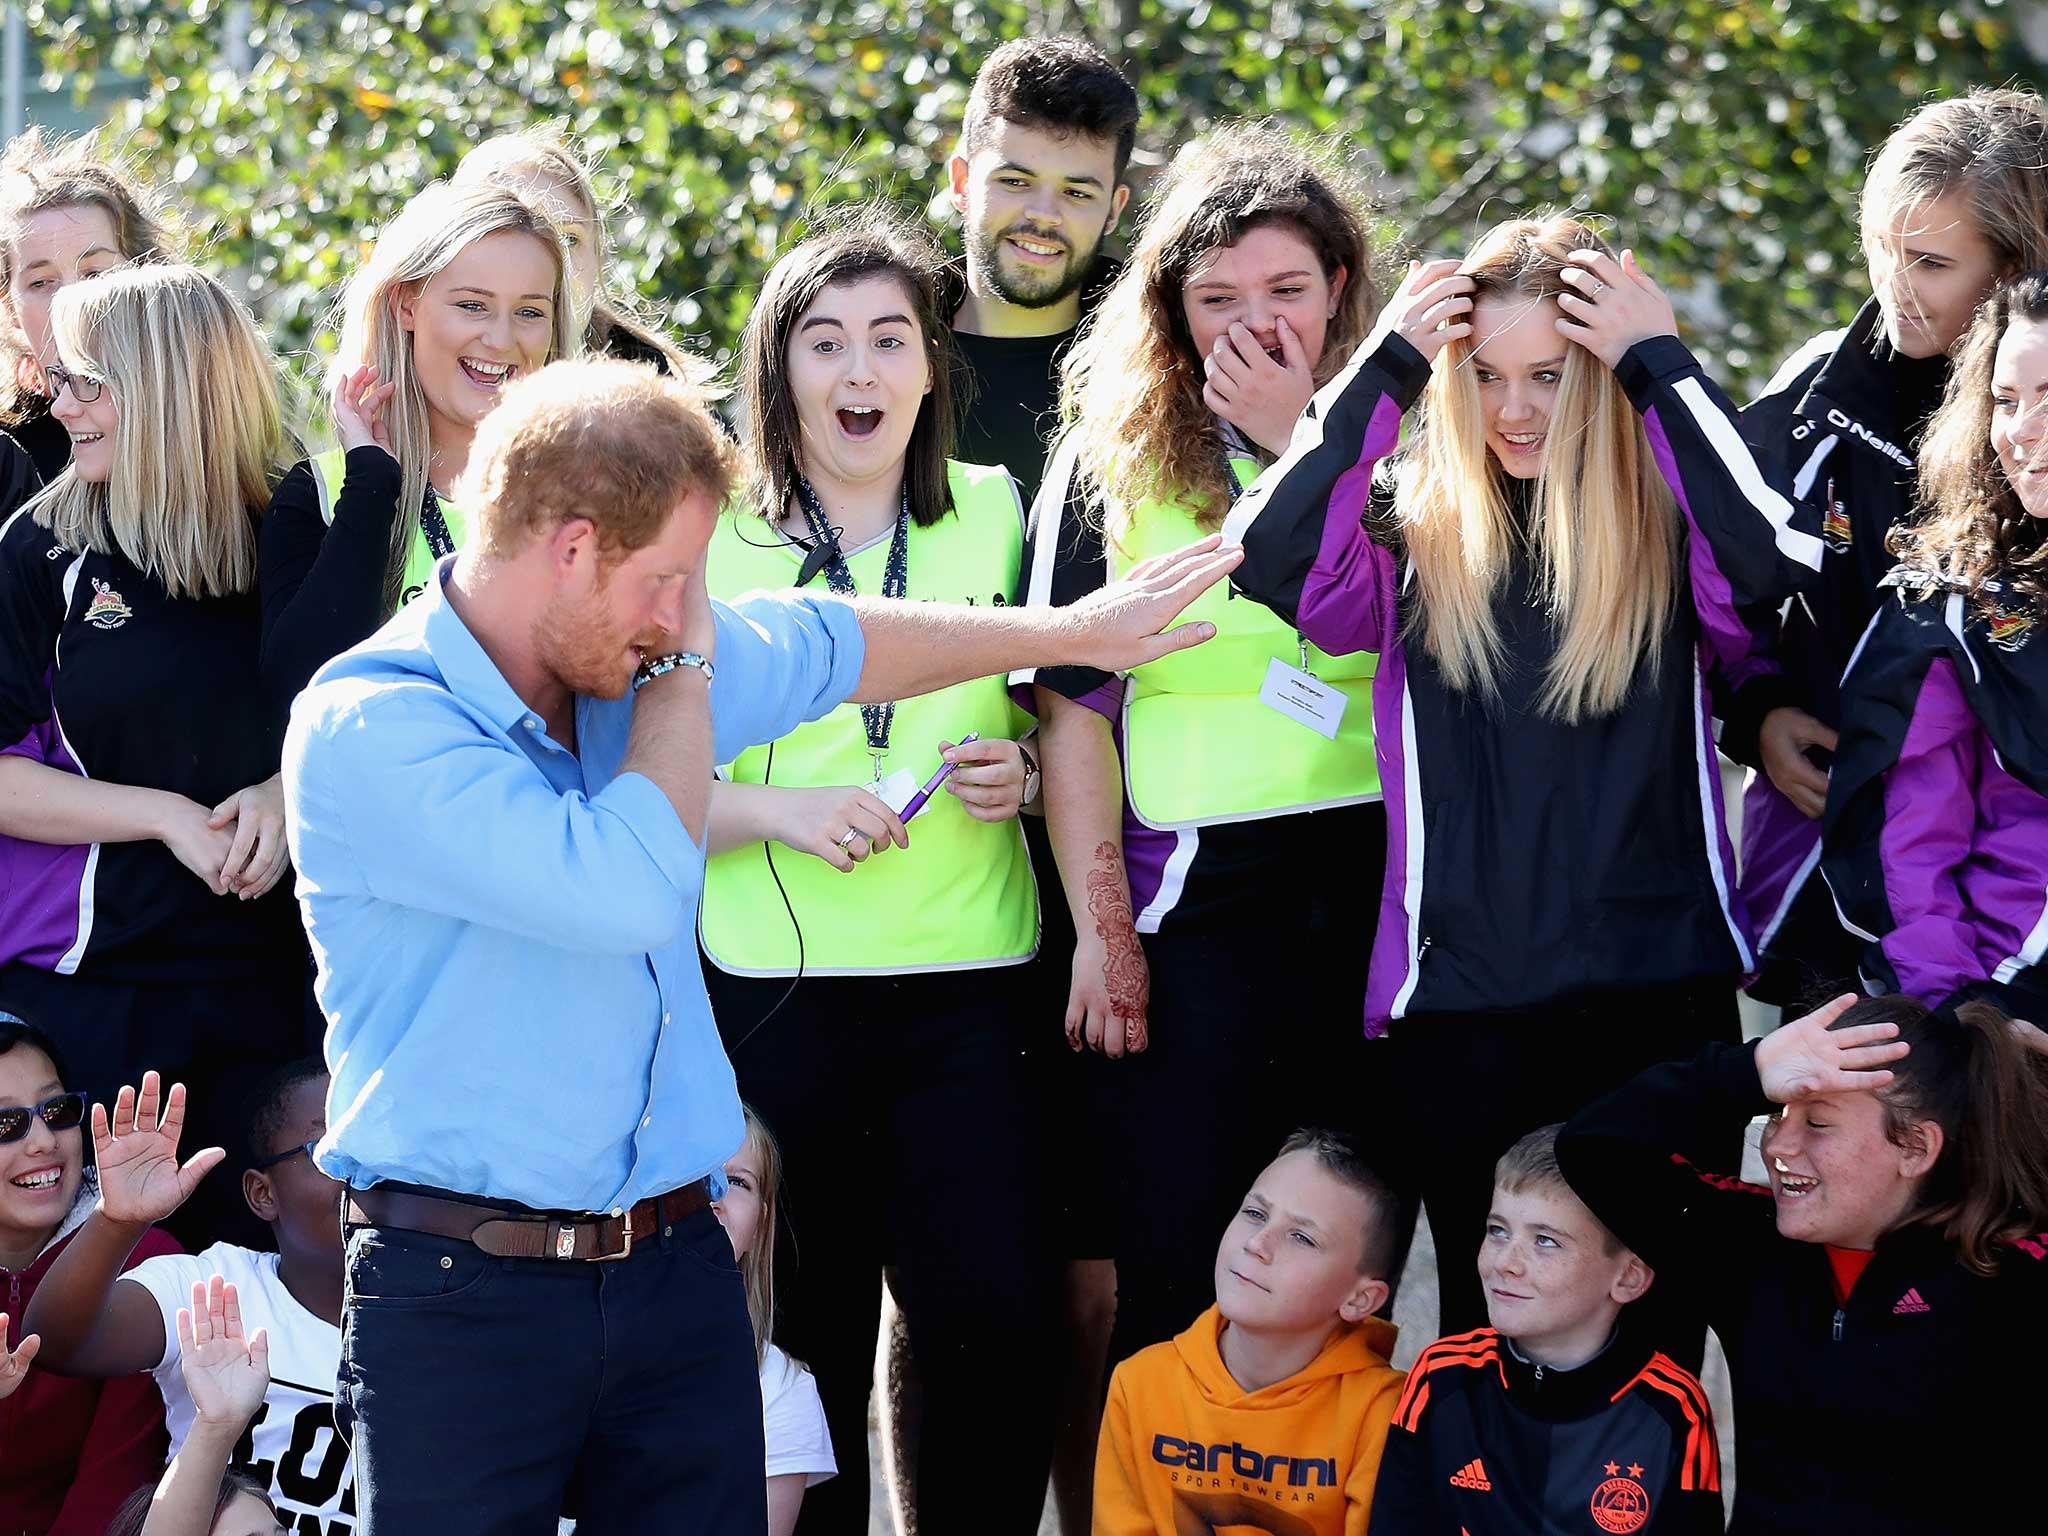 Prince Harry has travelled the world on royal tours